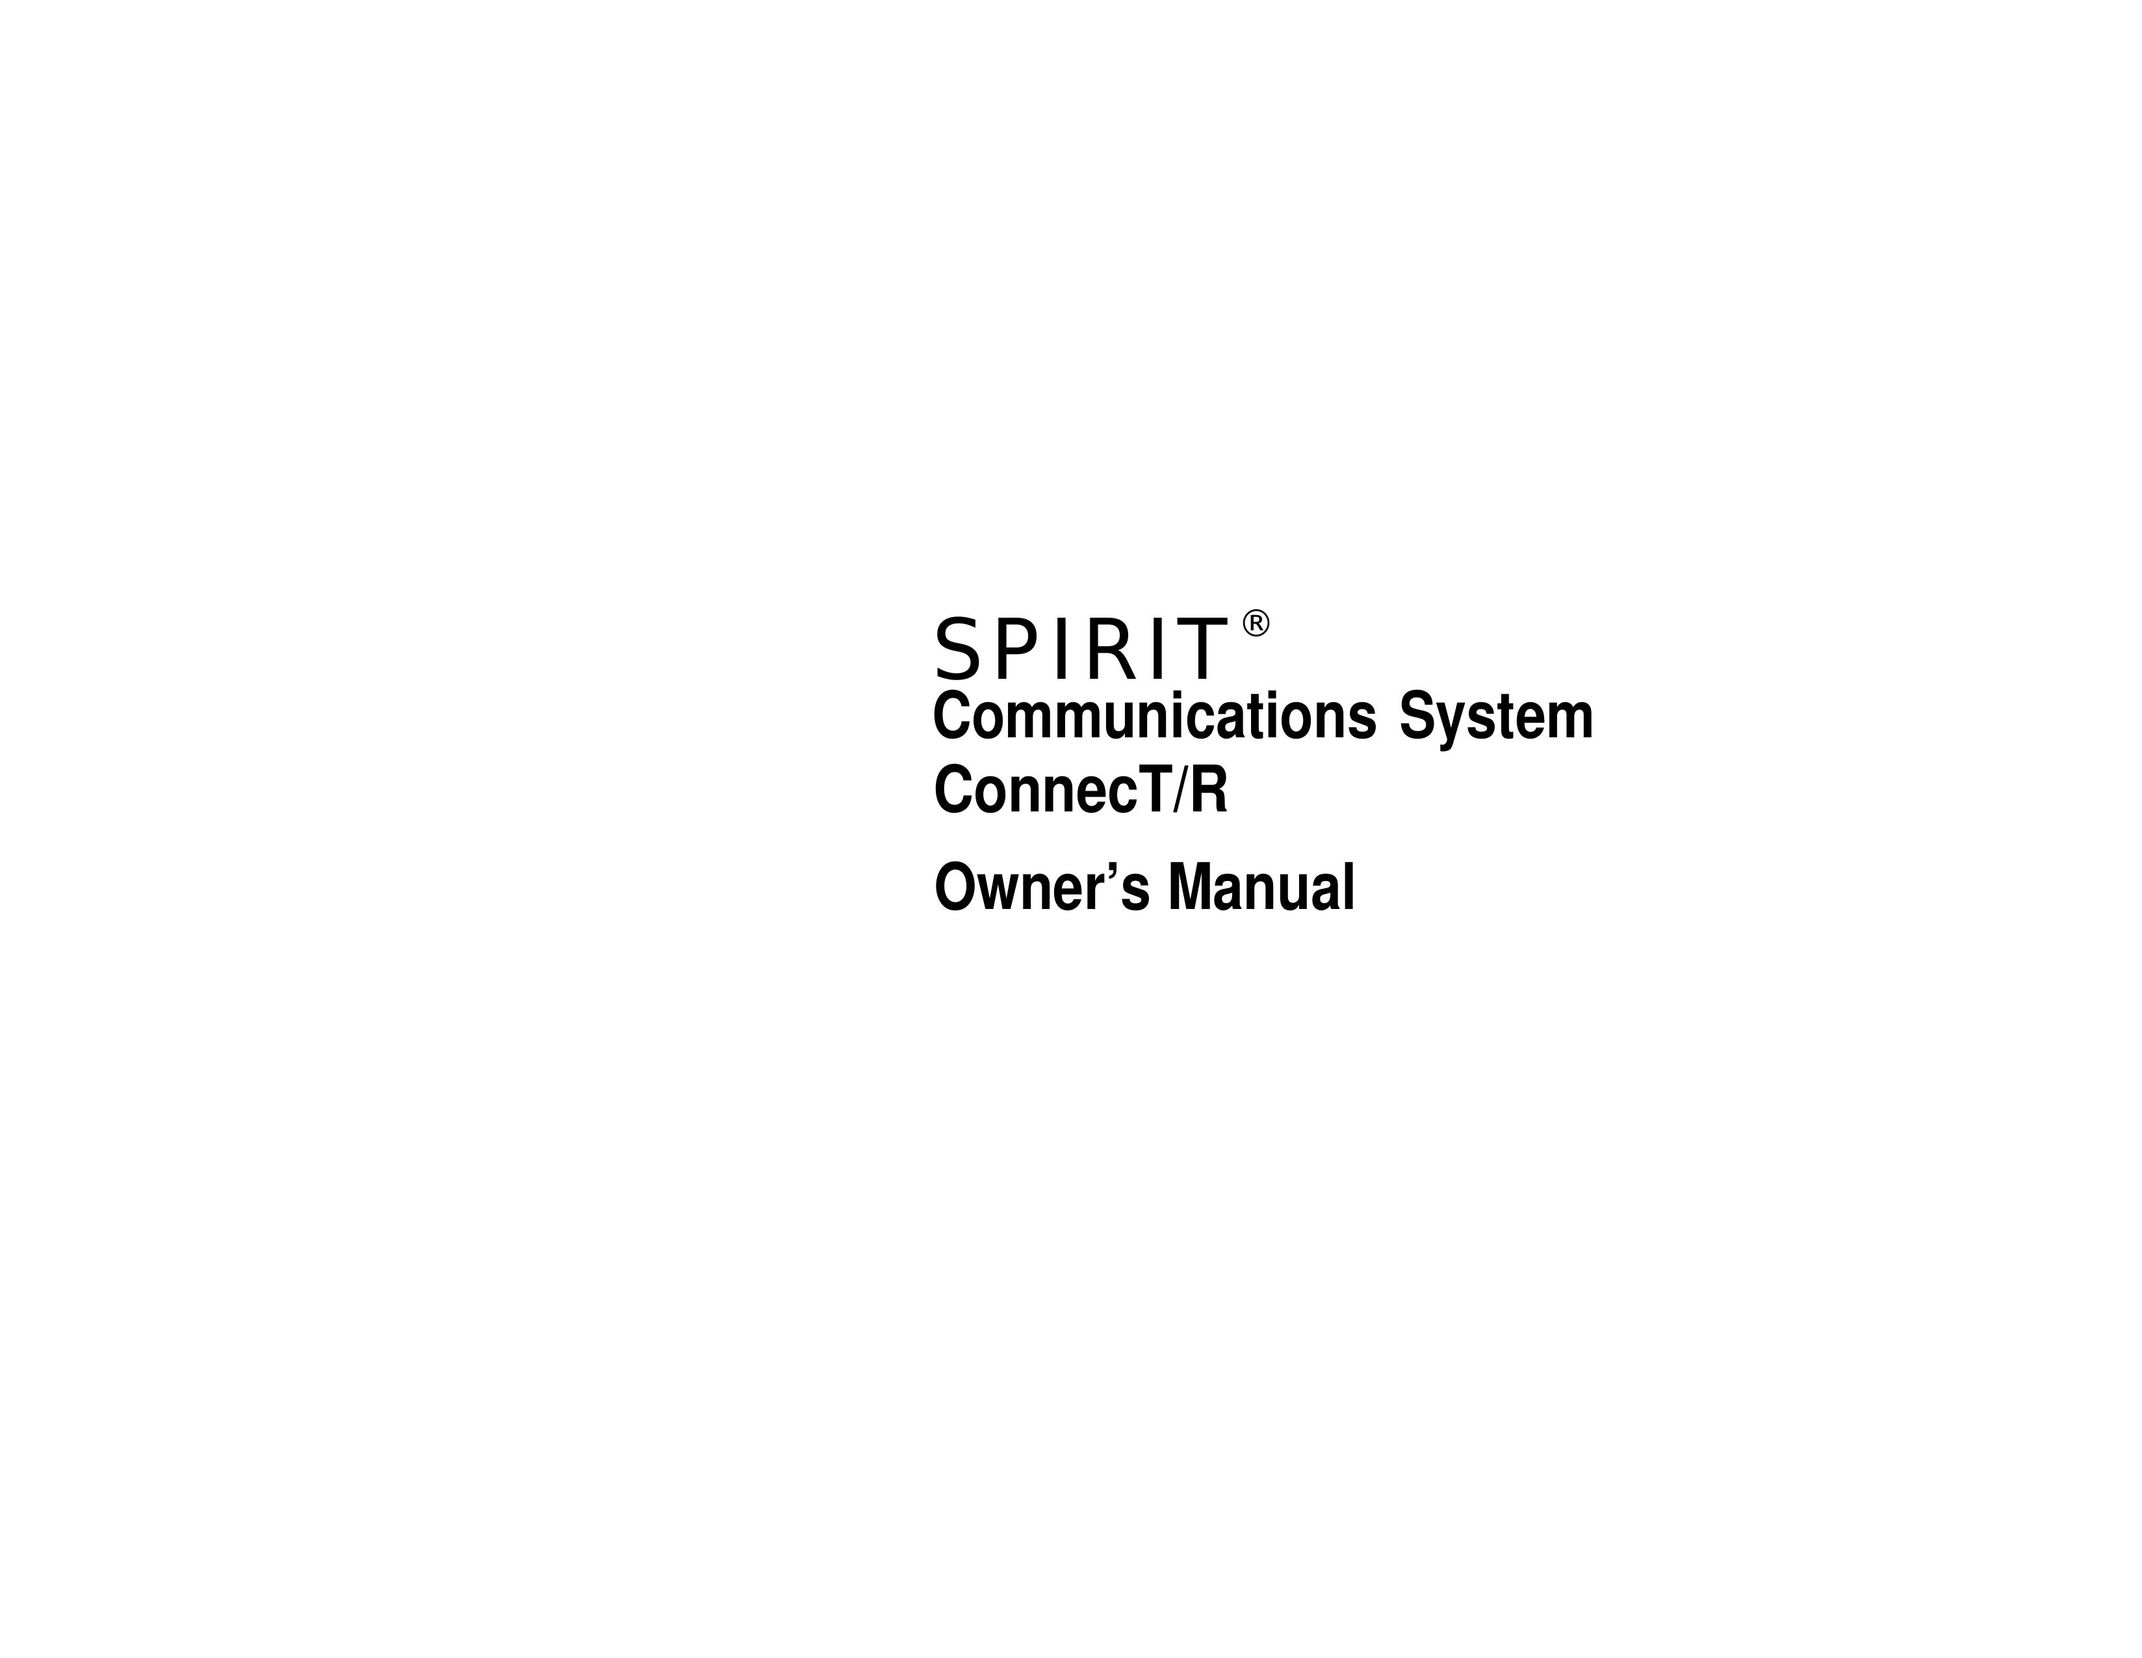 Spirit Communications System ConnecT/R Cordless Telephone User Manual